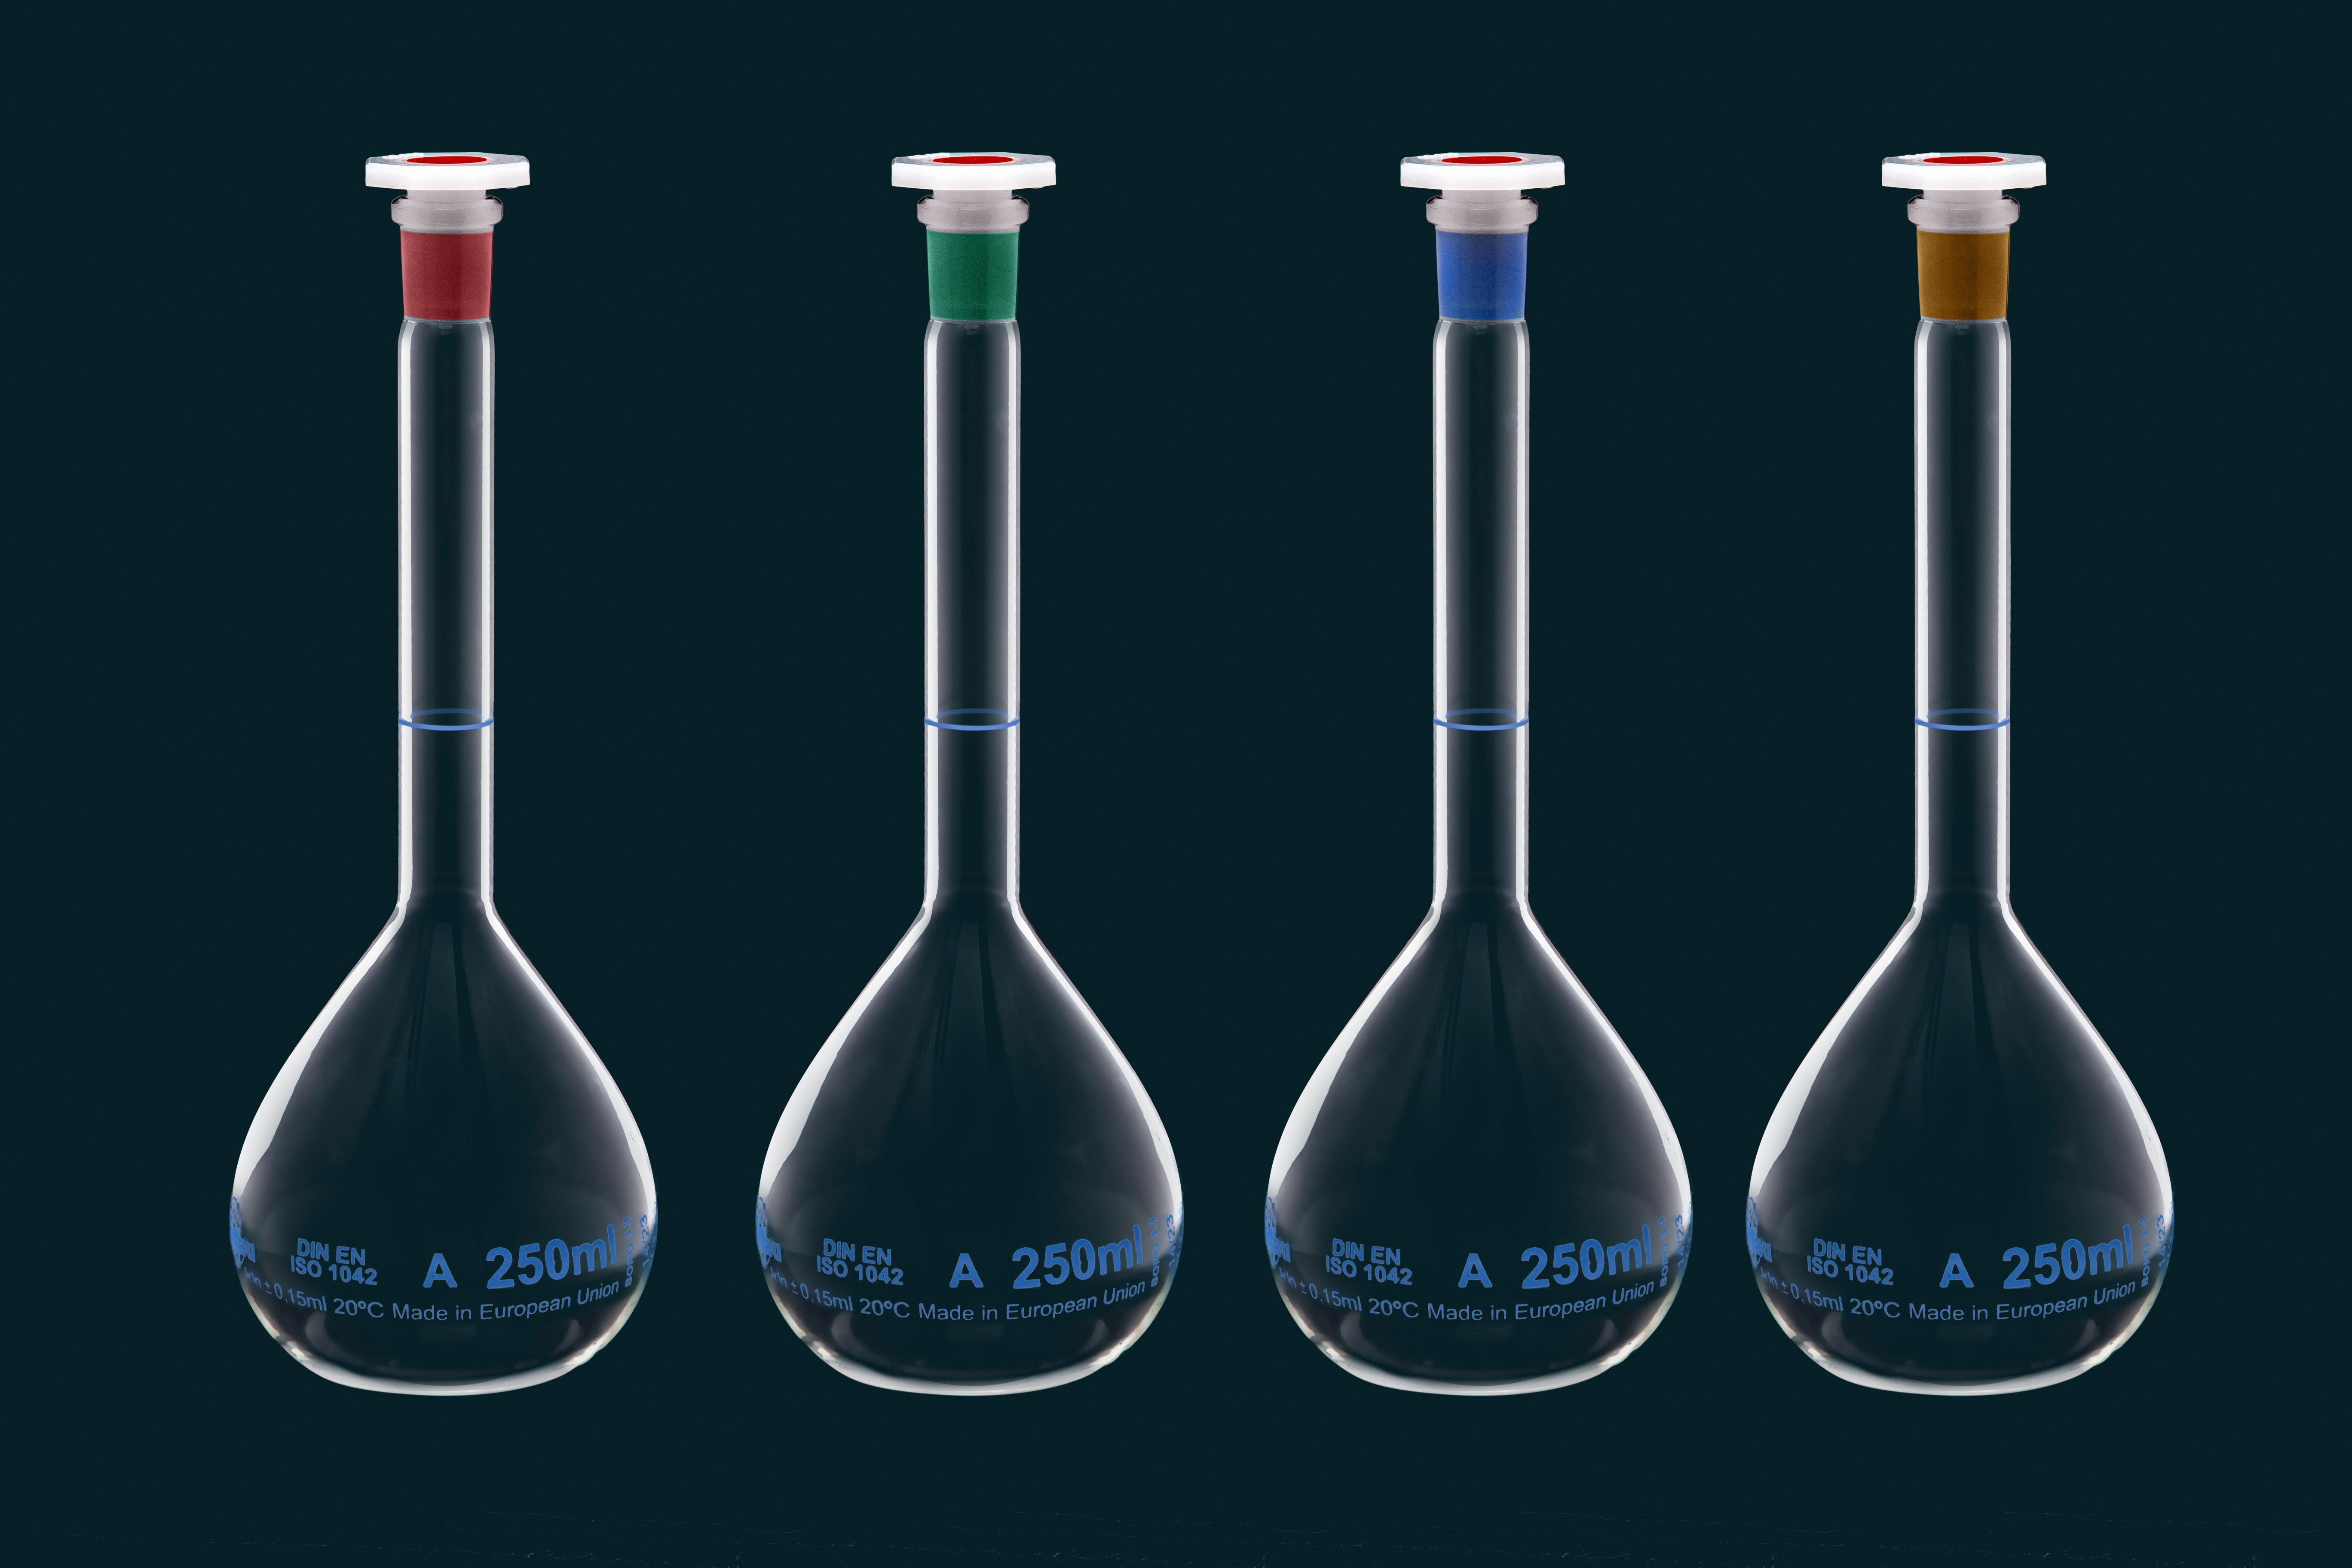 Volumetric flask with green neck, Class A, 25ml, with PE stopper, lot number and certificate of conformity